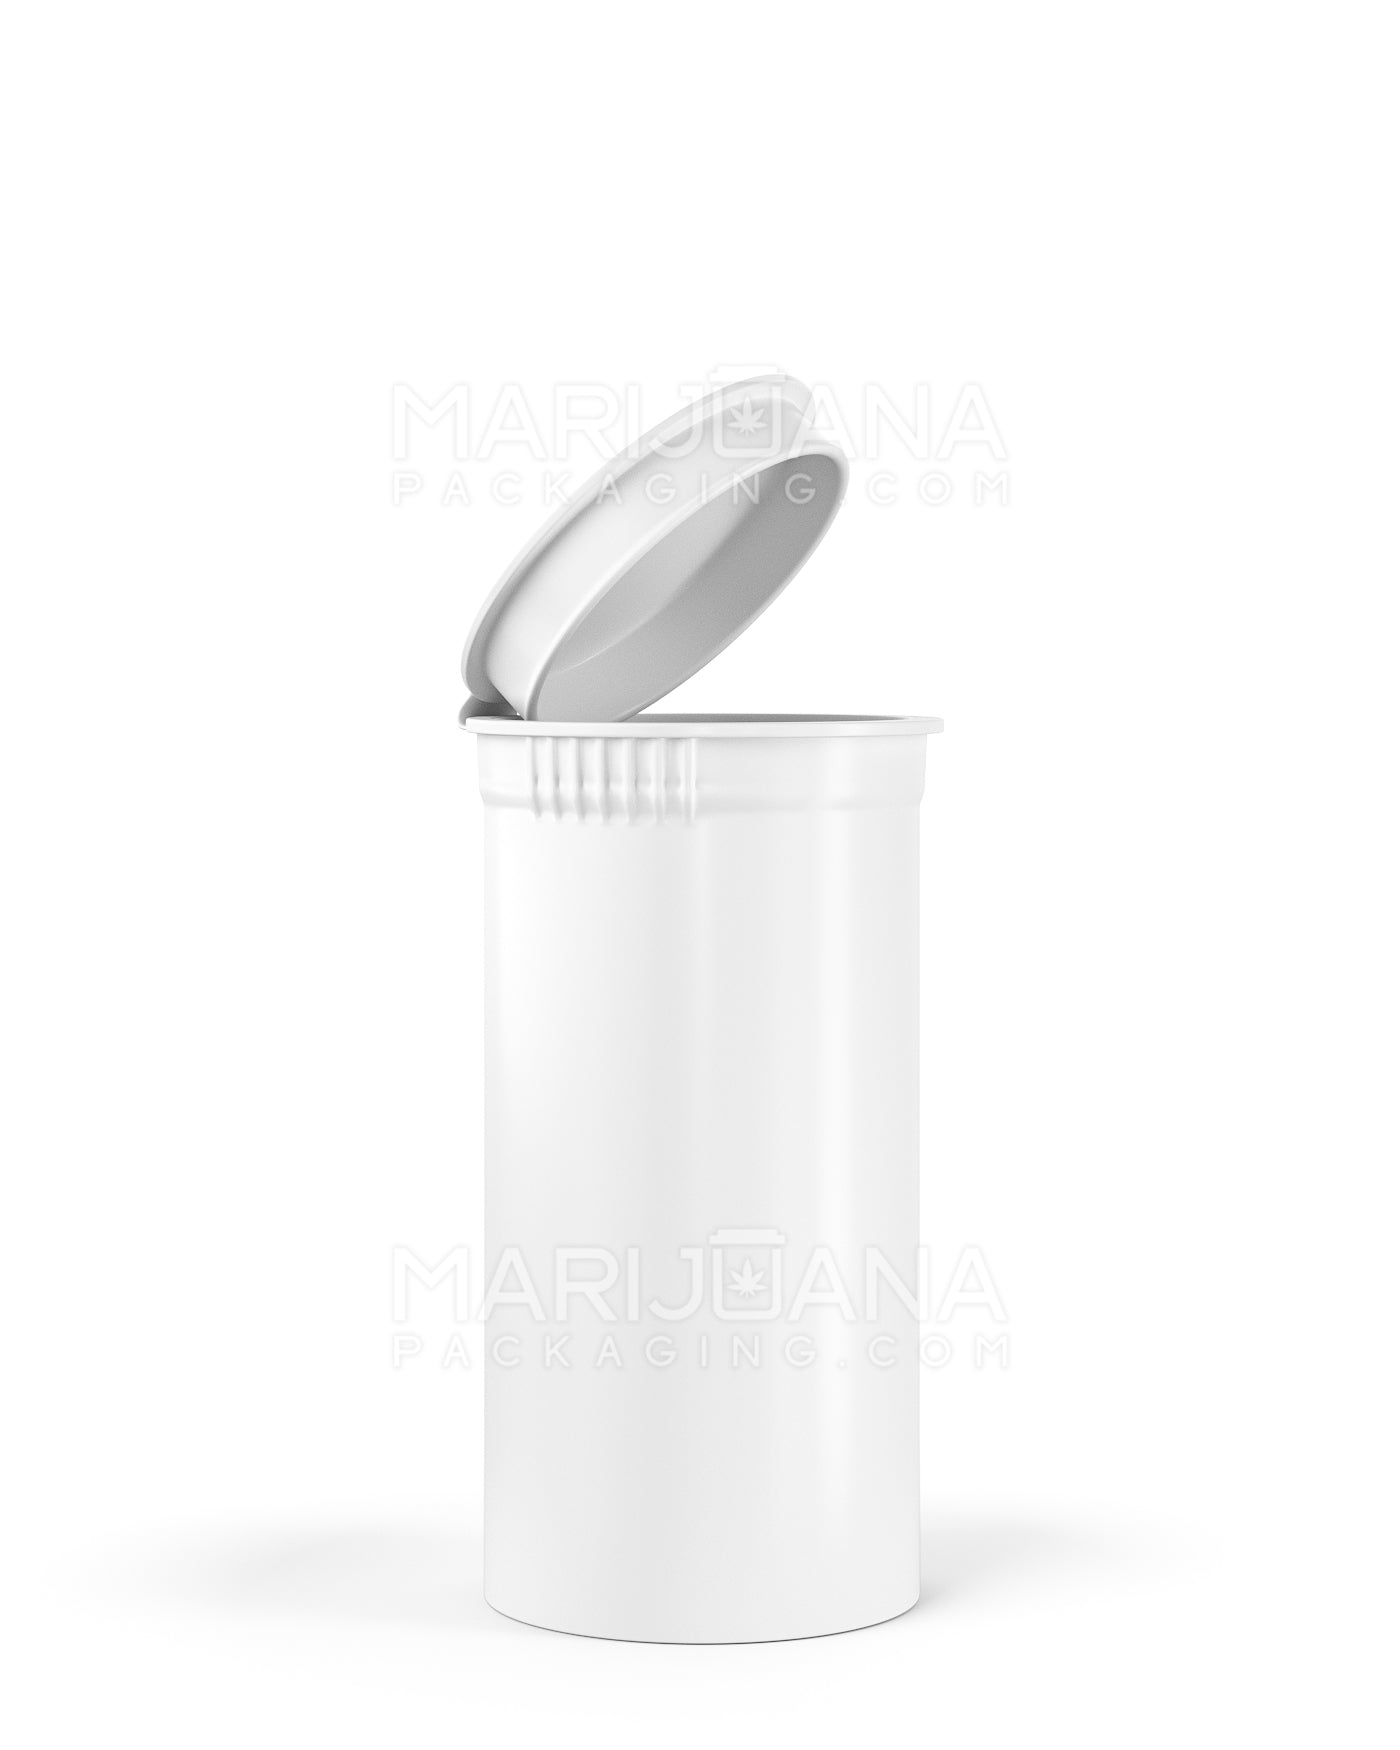 Child Resistant & Sustainable | 100% Biodegradable Opaque White Pop Top Bottles | 13dr - 2g - 315 Count - 1